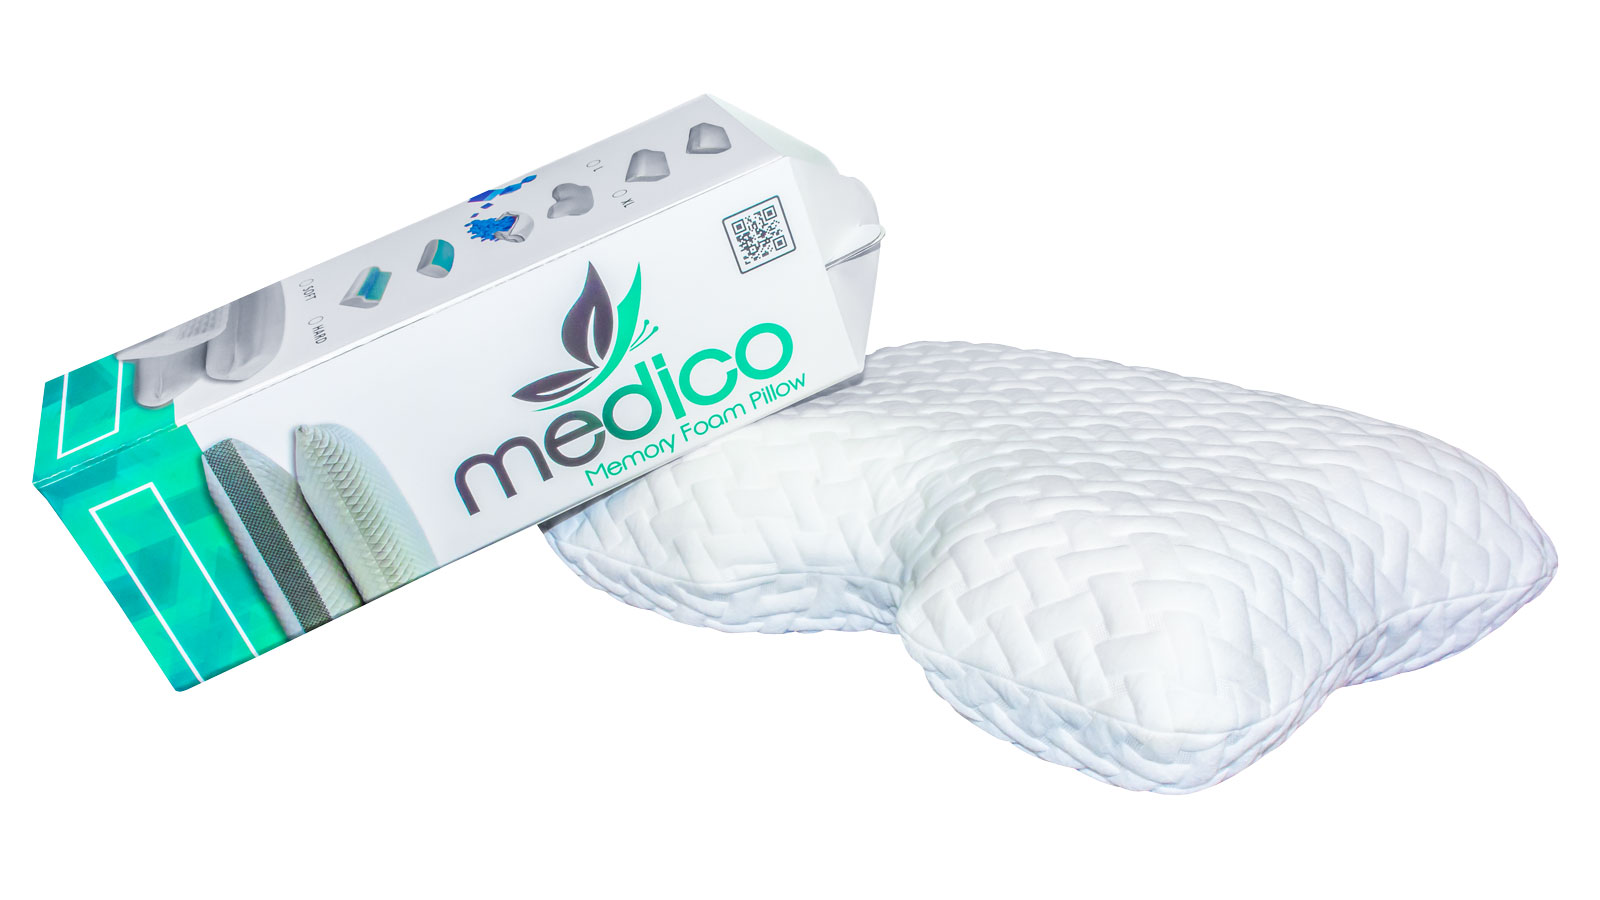 Medico Butterfly Pillow